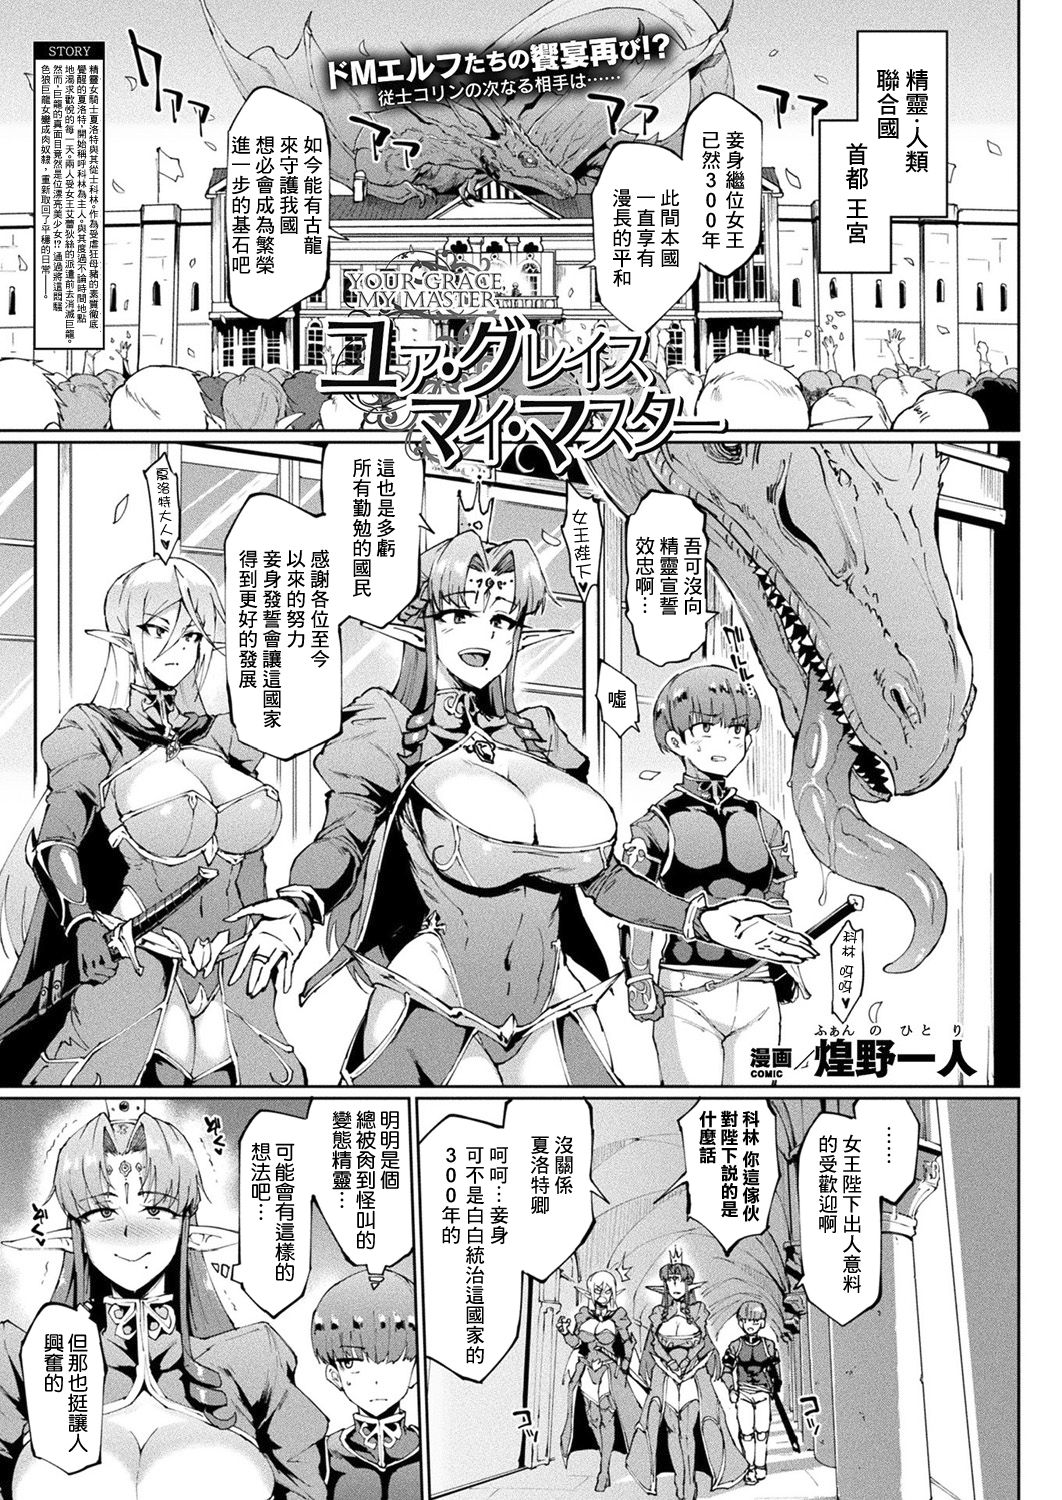 [Fan no hitori] YOUR GRACE, MY MASTER (COMIC Unreal 2019-10 Vol. 81) [Chinese] [鬼畜王汉化组] [Digital] page 2 full